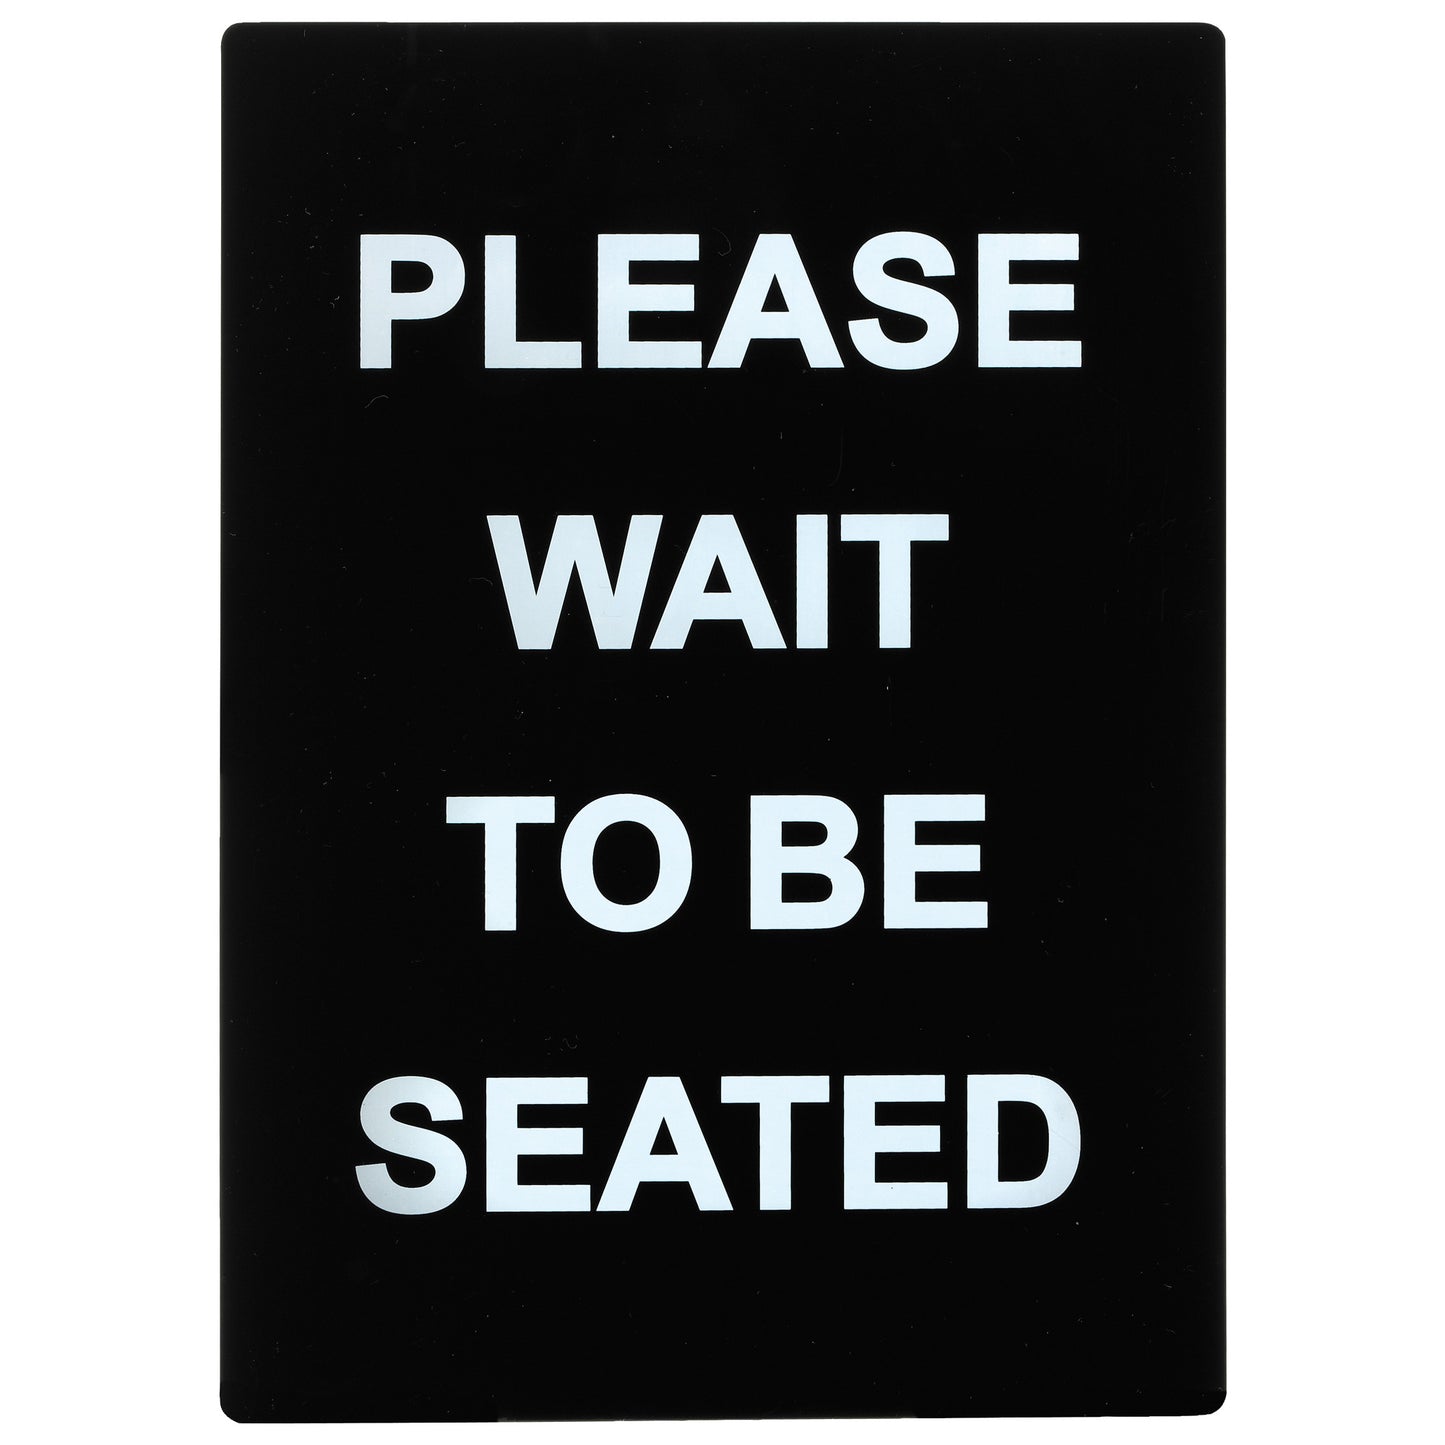 SGN-802 - Stanchion Frame Sign - SGN-802 - Please Wait To Be Seated